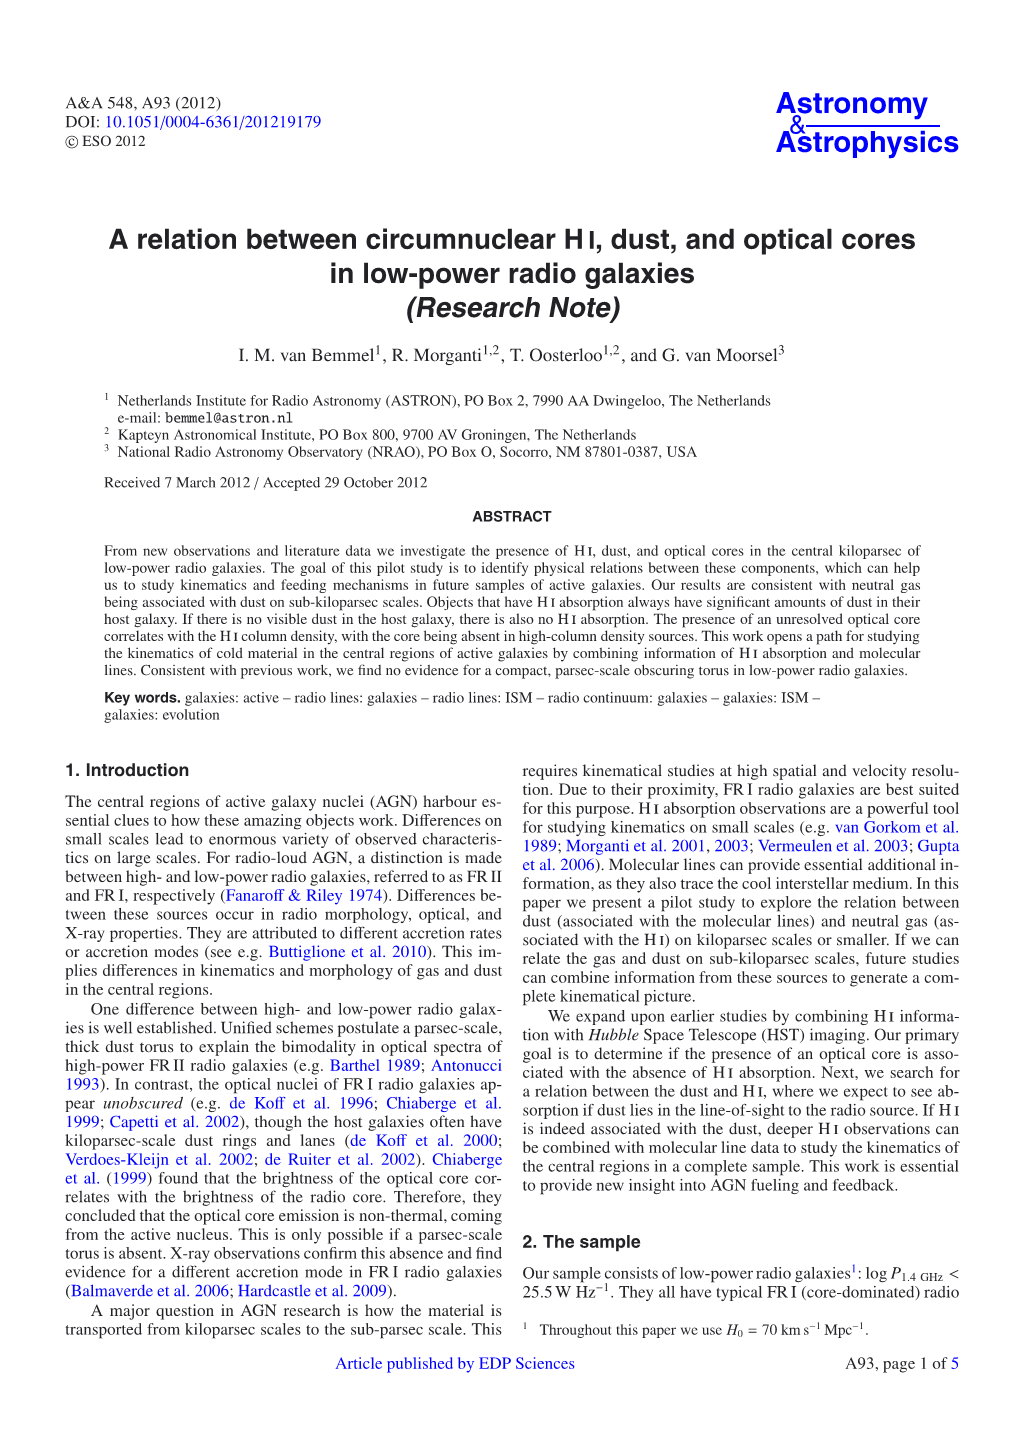 A Relation Between Circumnuclear H I, Dust, and Optical Cores in Low-Power Radio Galaxies (Research Note)